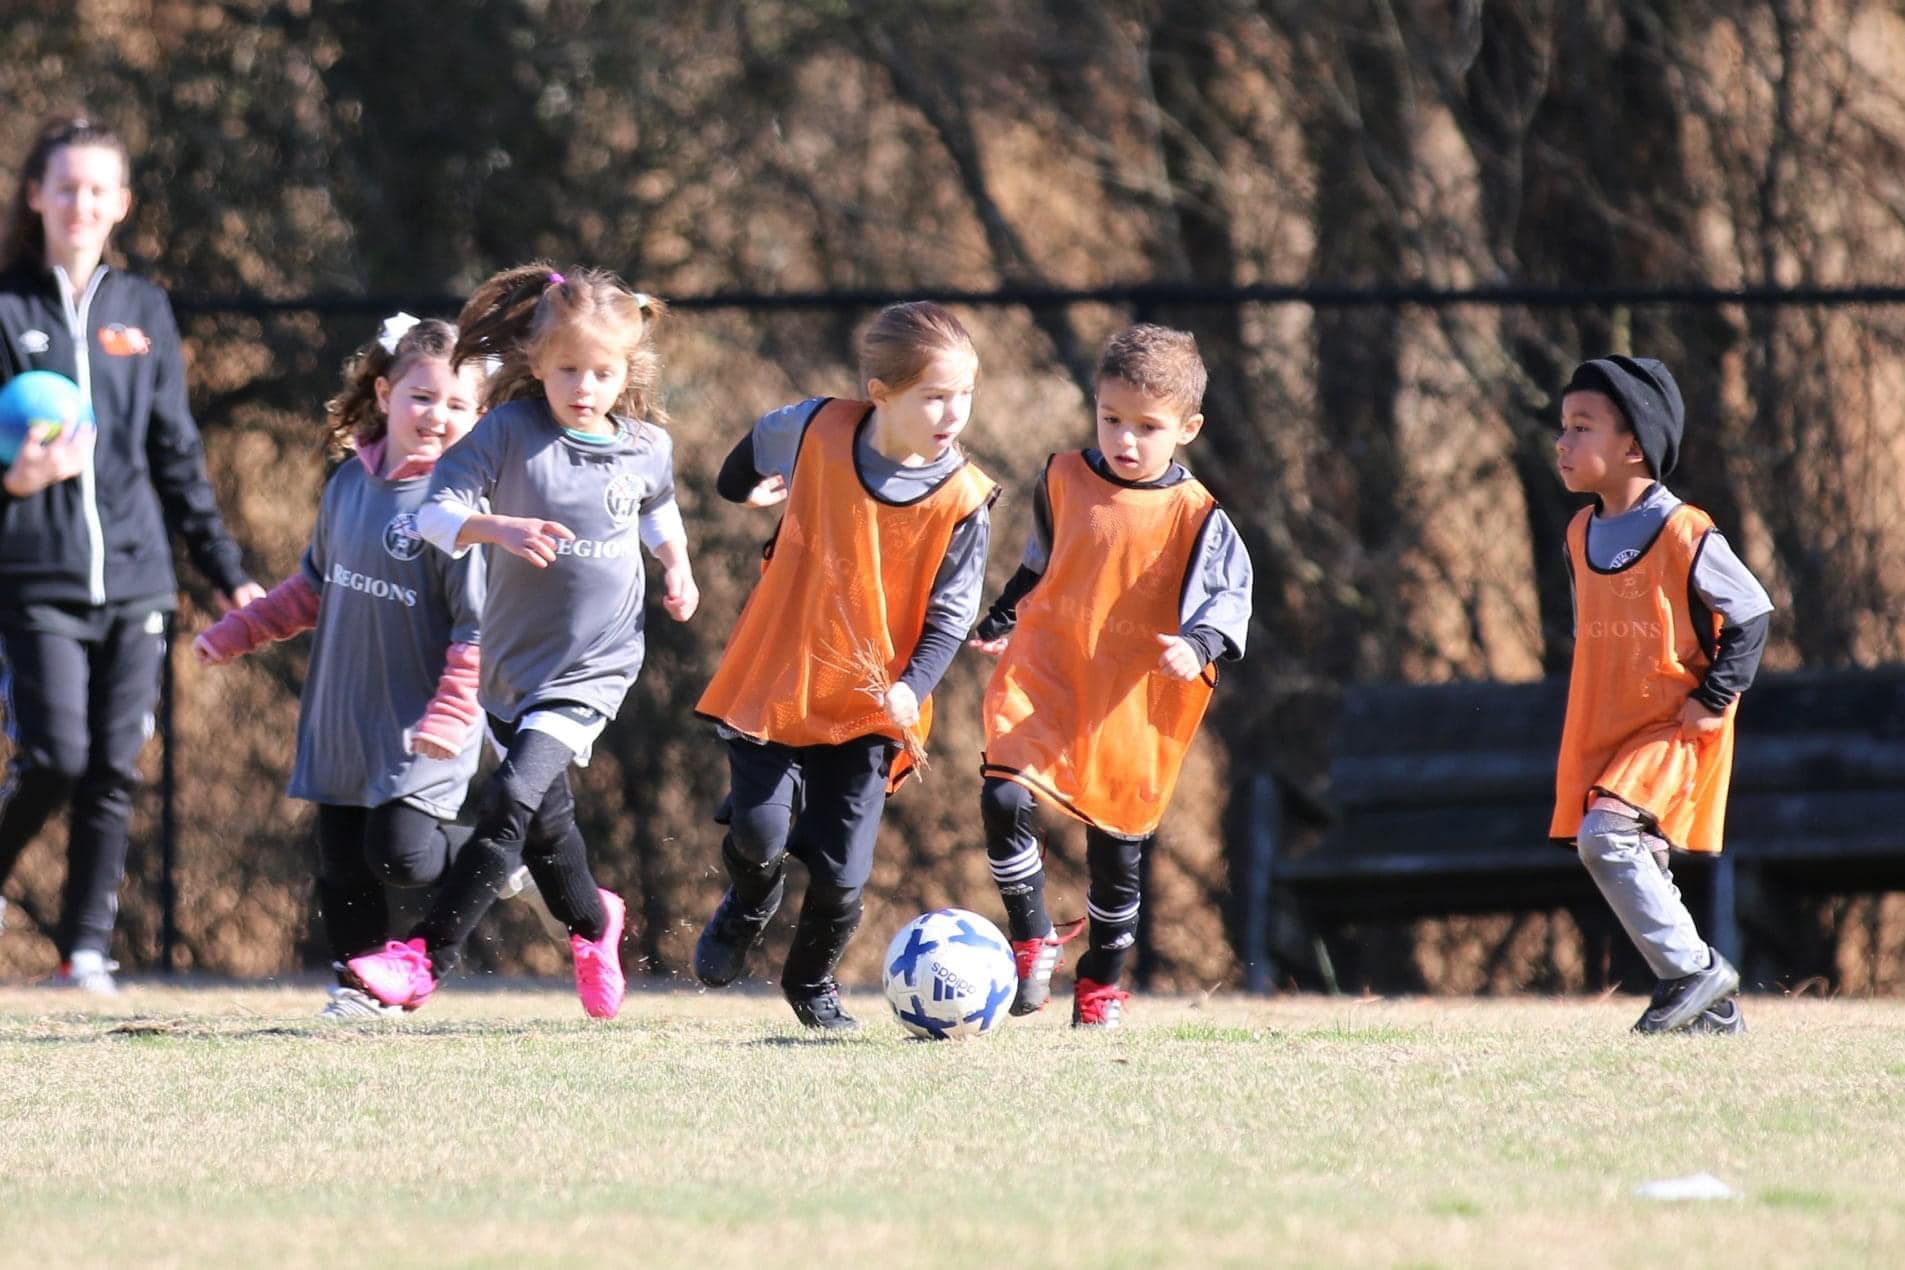 Total Futbol Club promises a 'new youth soccer experience' for Trussville